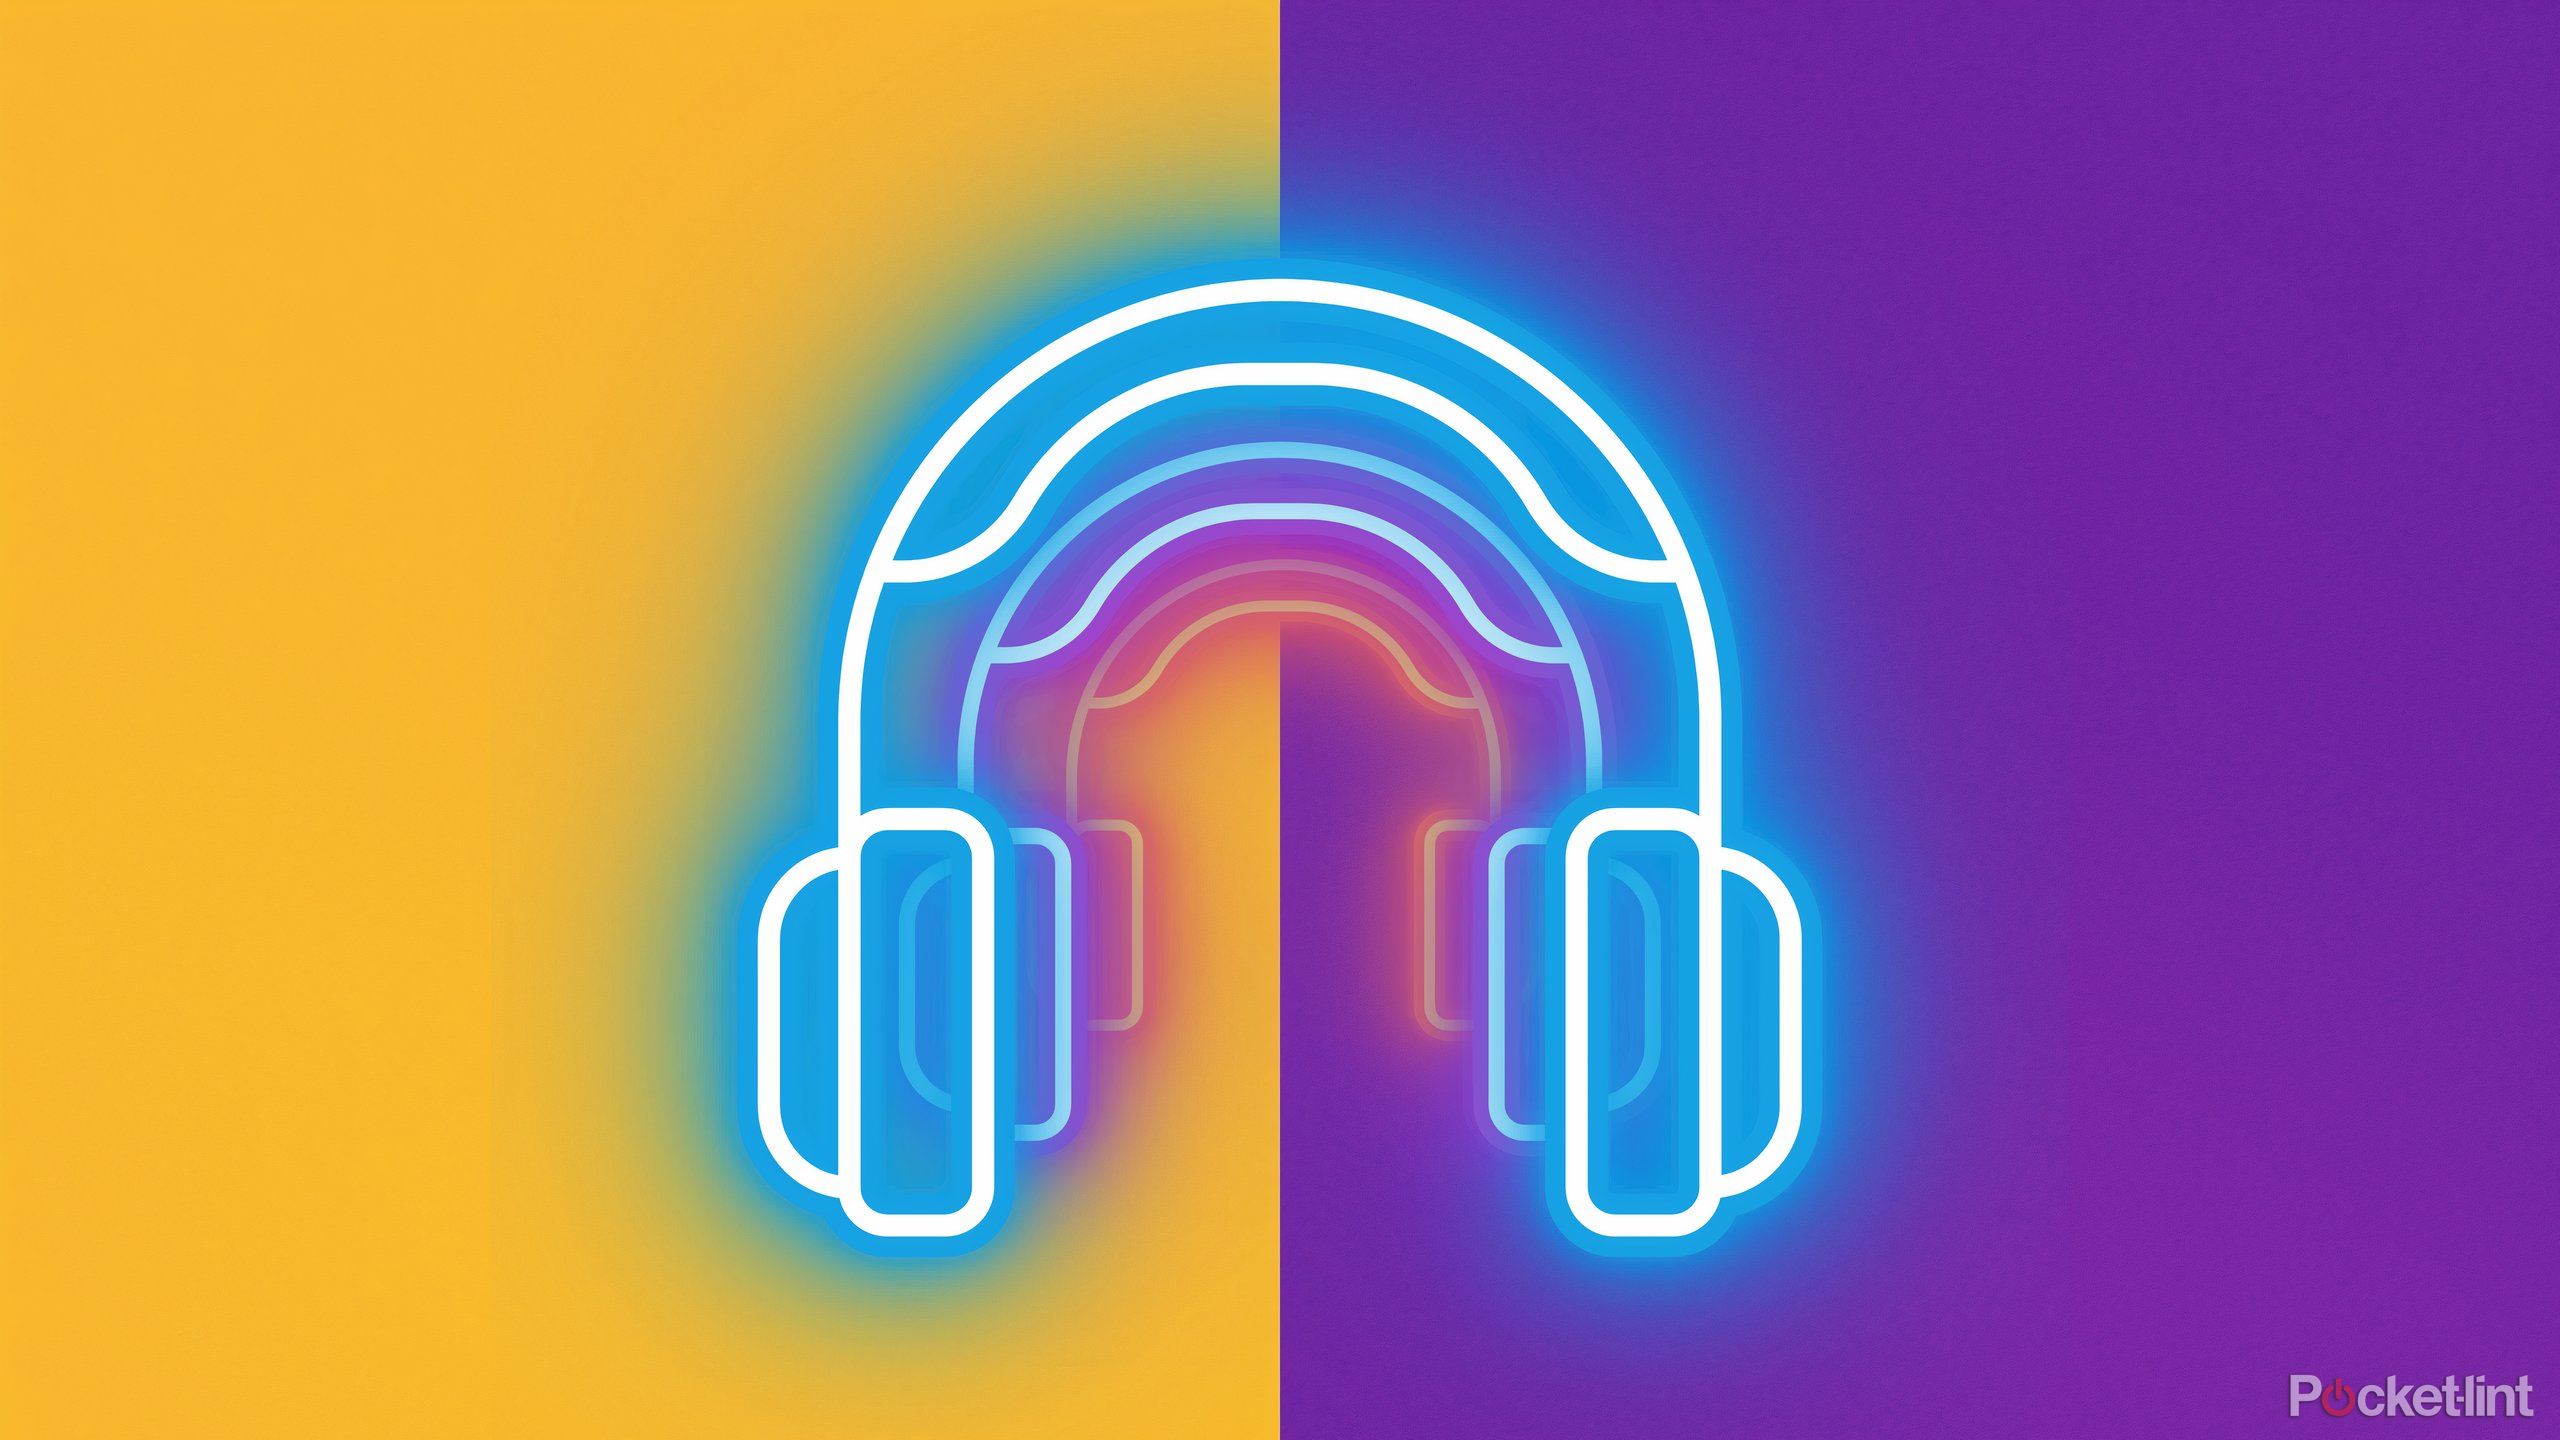 Neon blue headphone graphic over yellow and purple background